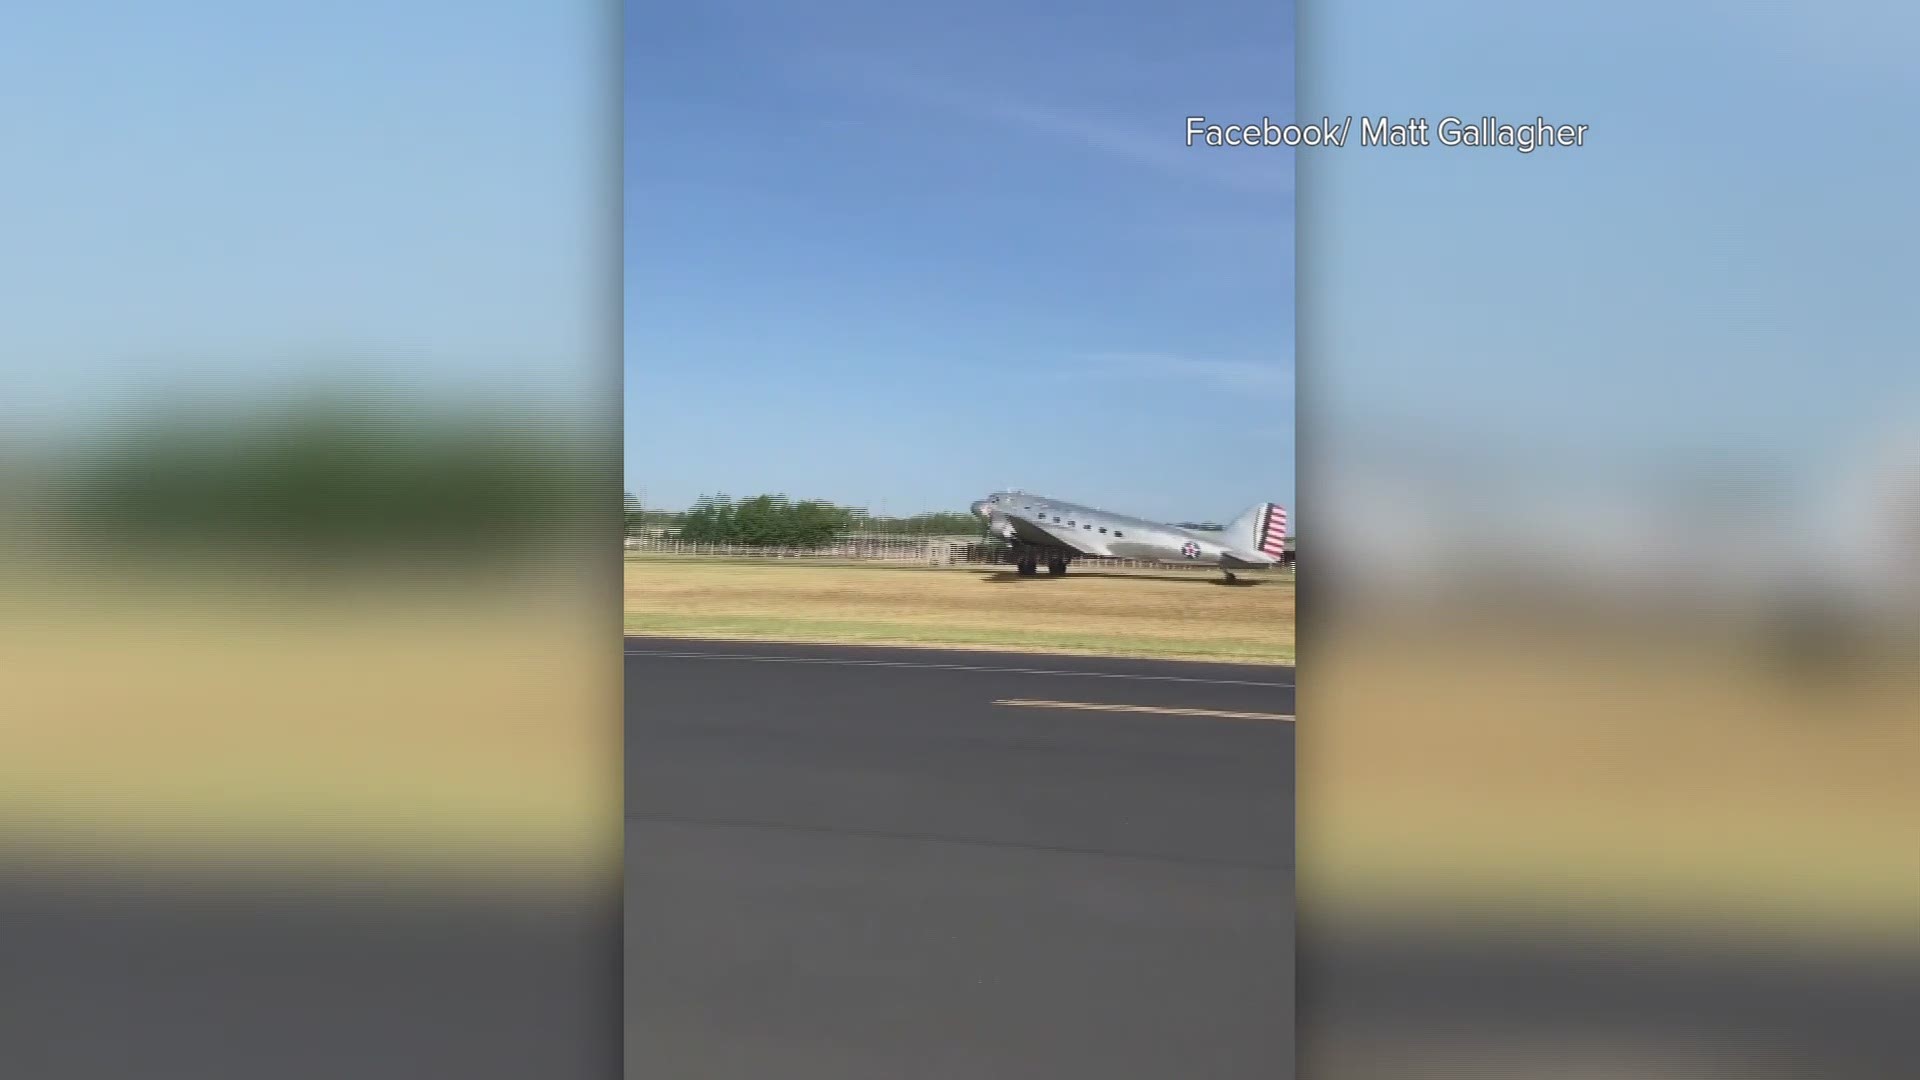 Two people were hospitalized after the Bluebonnet Belle, bound for Wisconsin, crashed during takeoff. Video courtesy of Matt Gallagher.